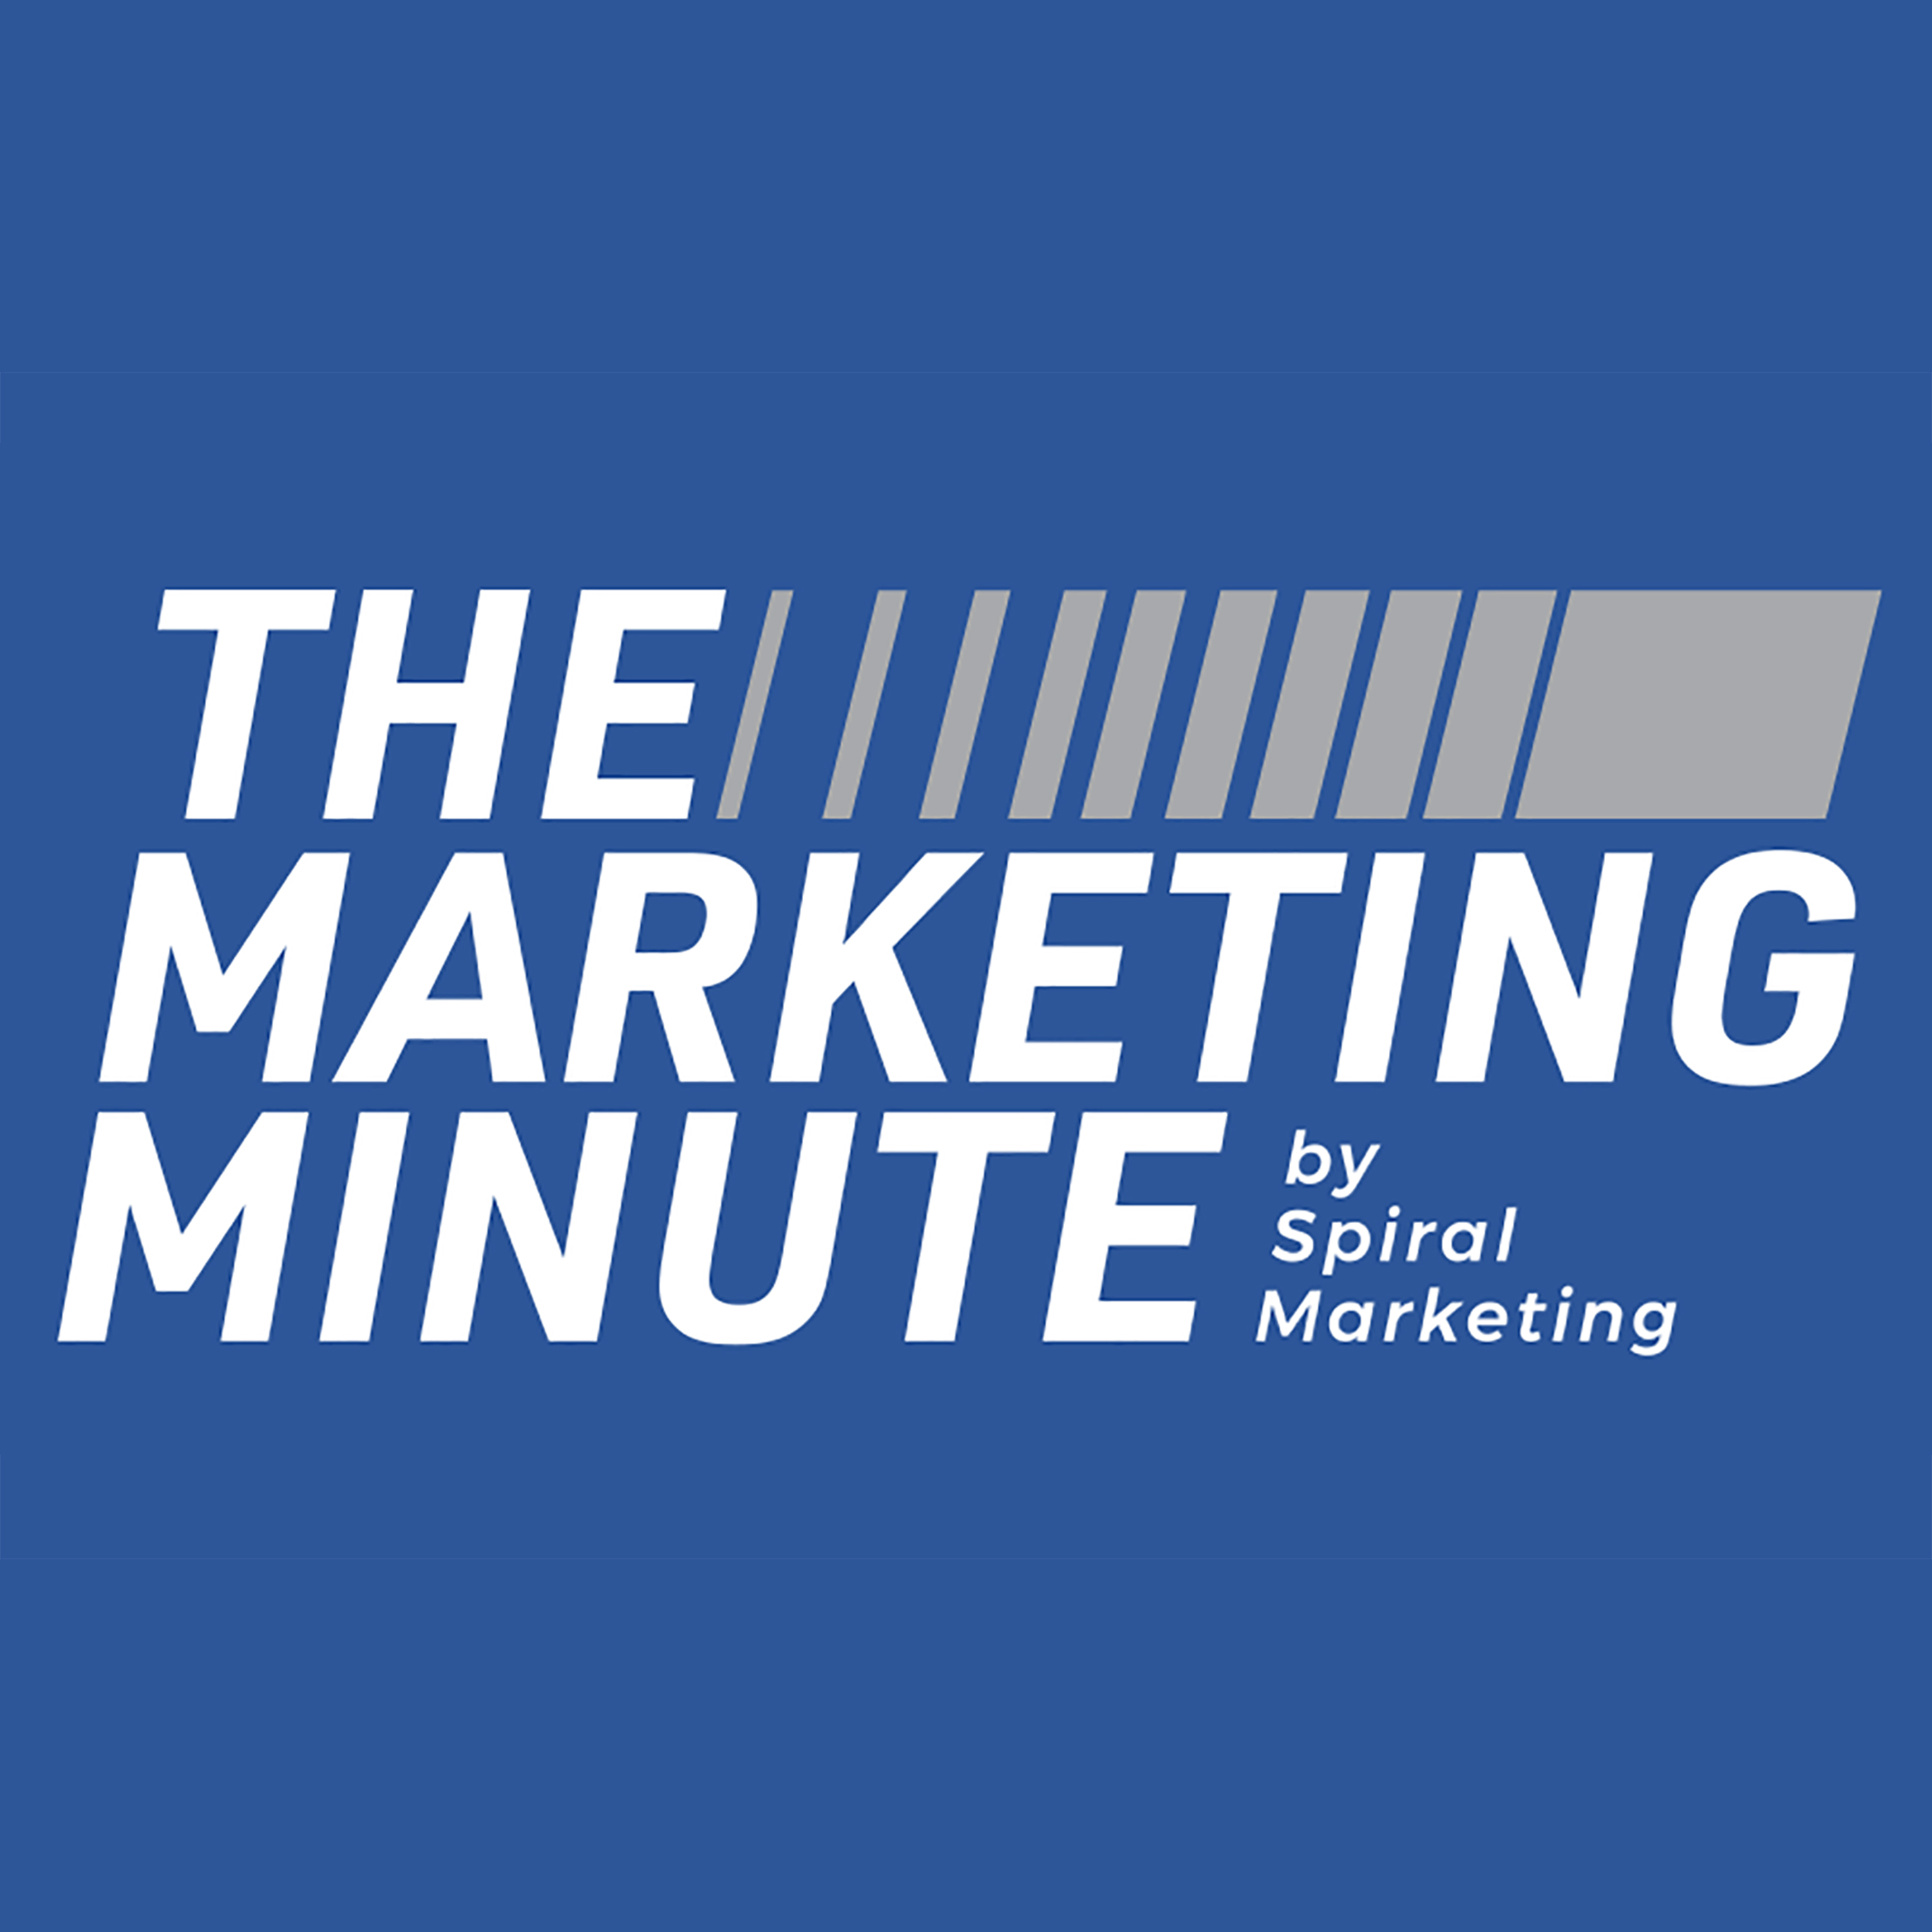 The Marketing Minute